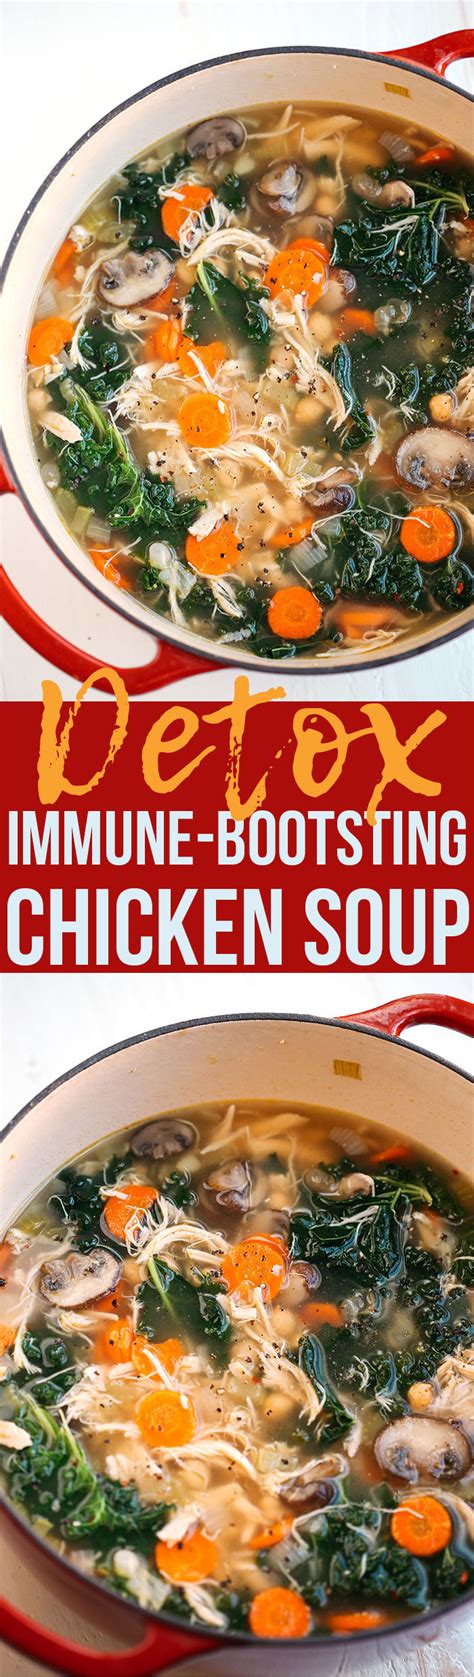 It is the old reliable of chicken soup recipes. Detox Immune-Boosting Chicken Soup - Eat Yourself Skinny